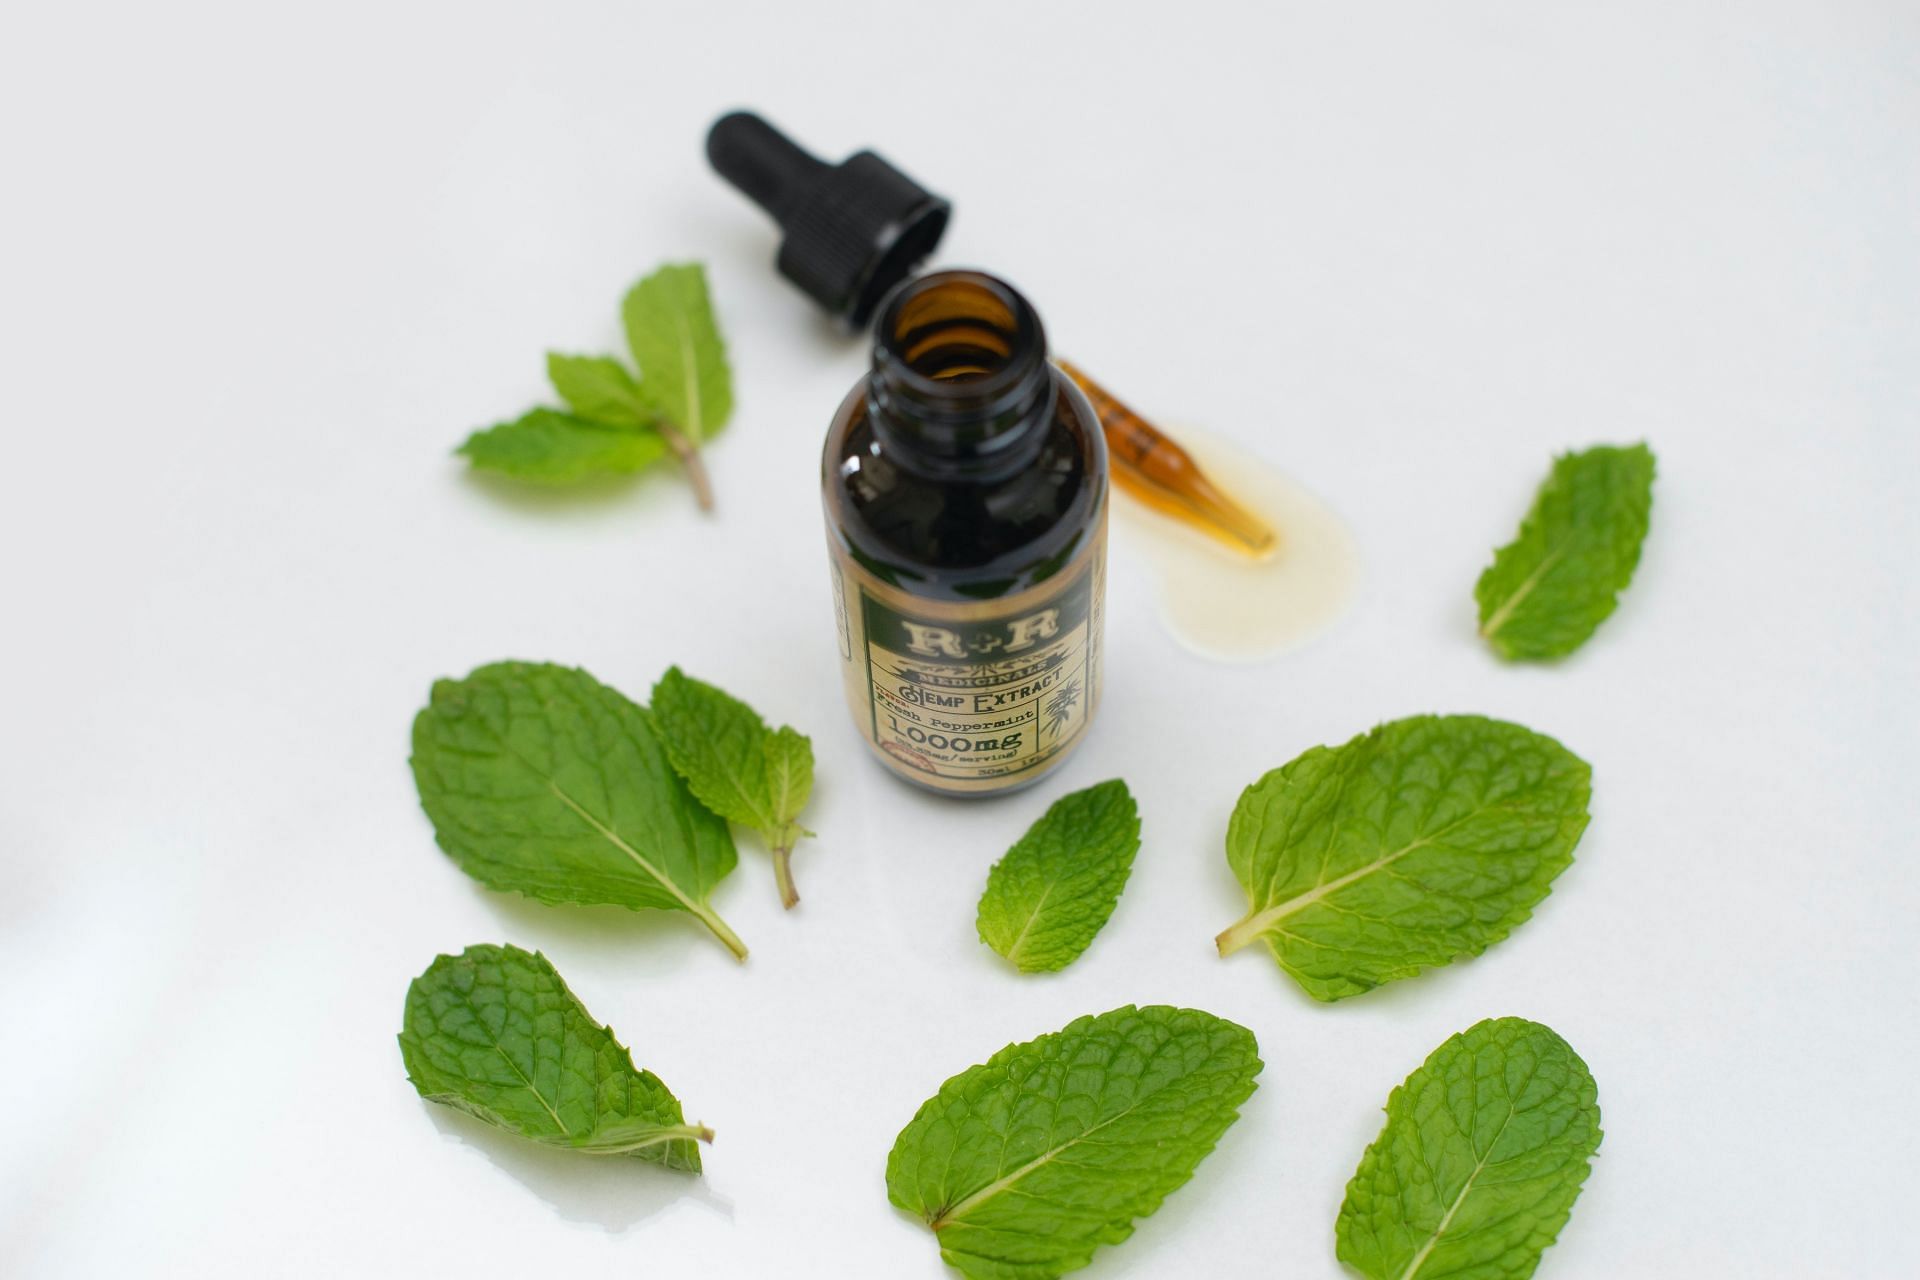 There are various health benefits of peppermint oil. (Image via Unsplash / Stefan Rodriguez)